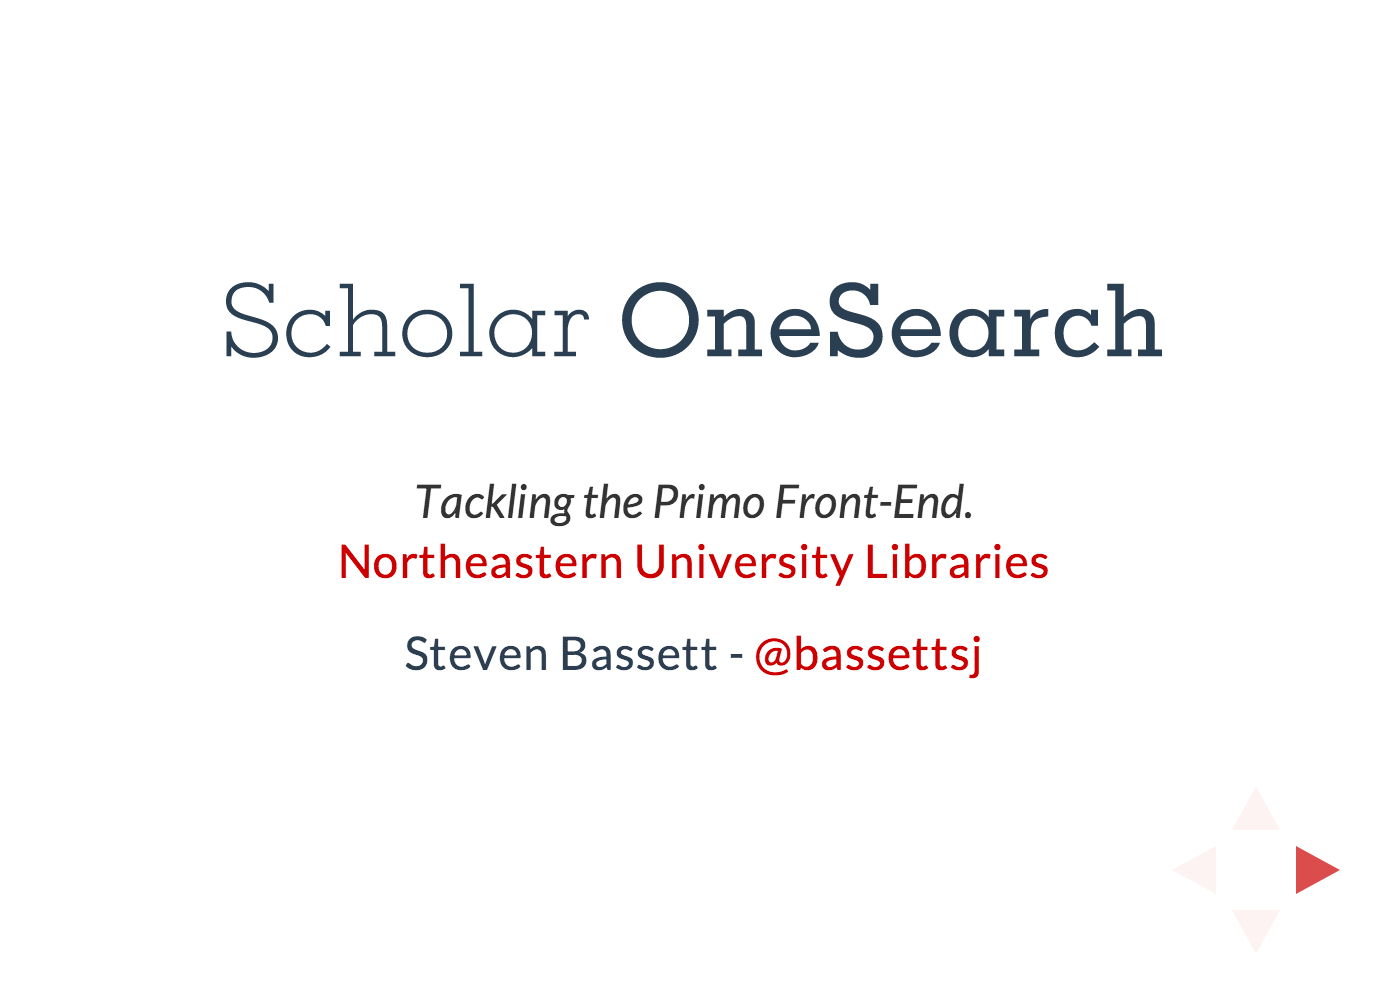 Scholar One Search